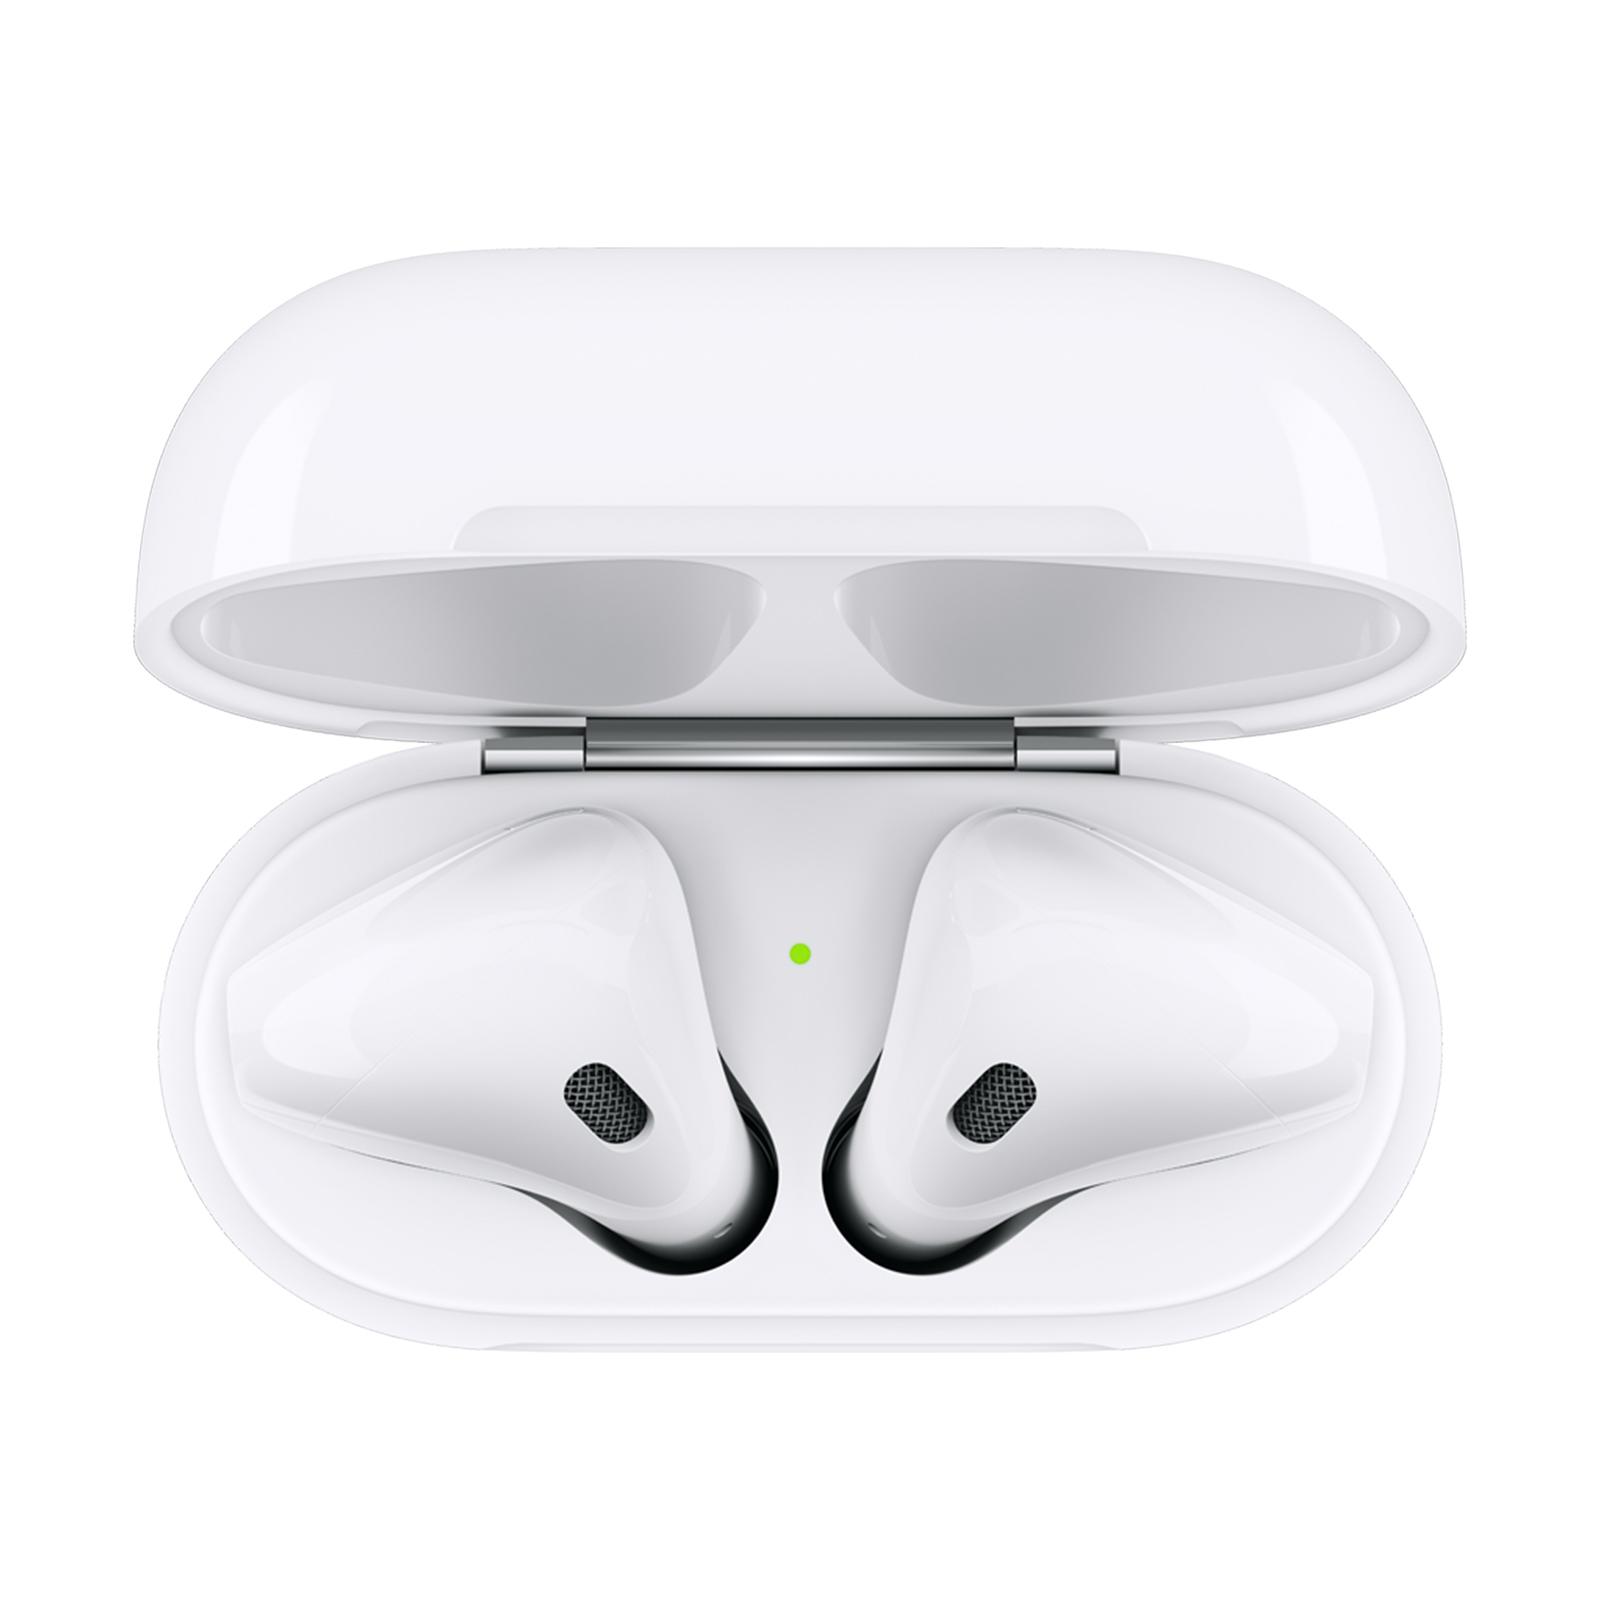 2019 Apple AirPods with Charging Case image31